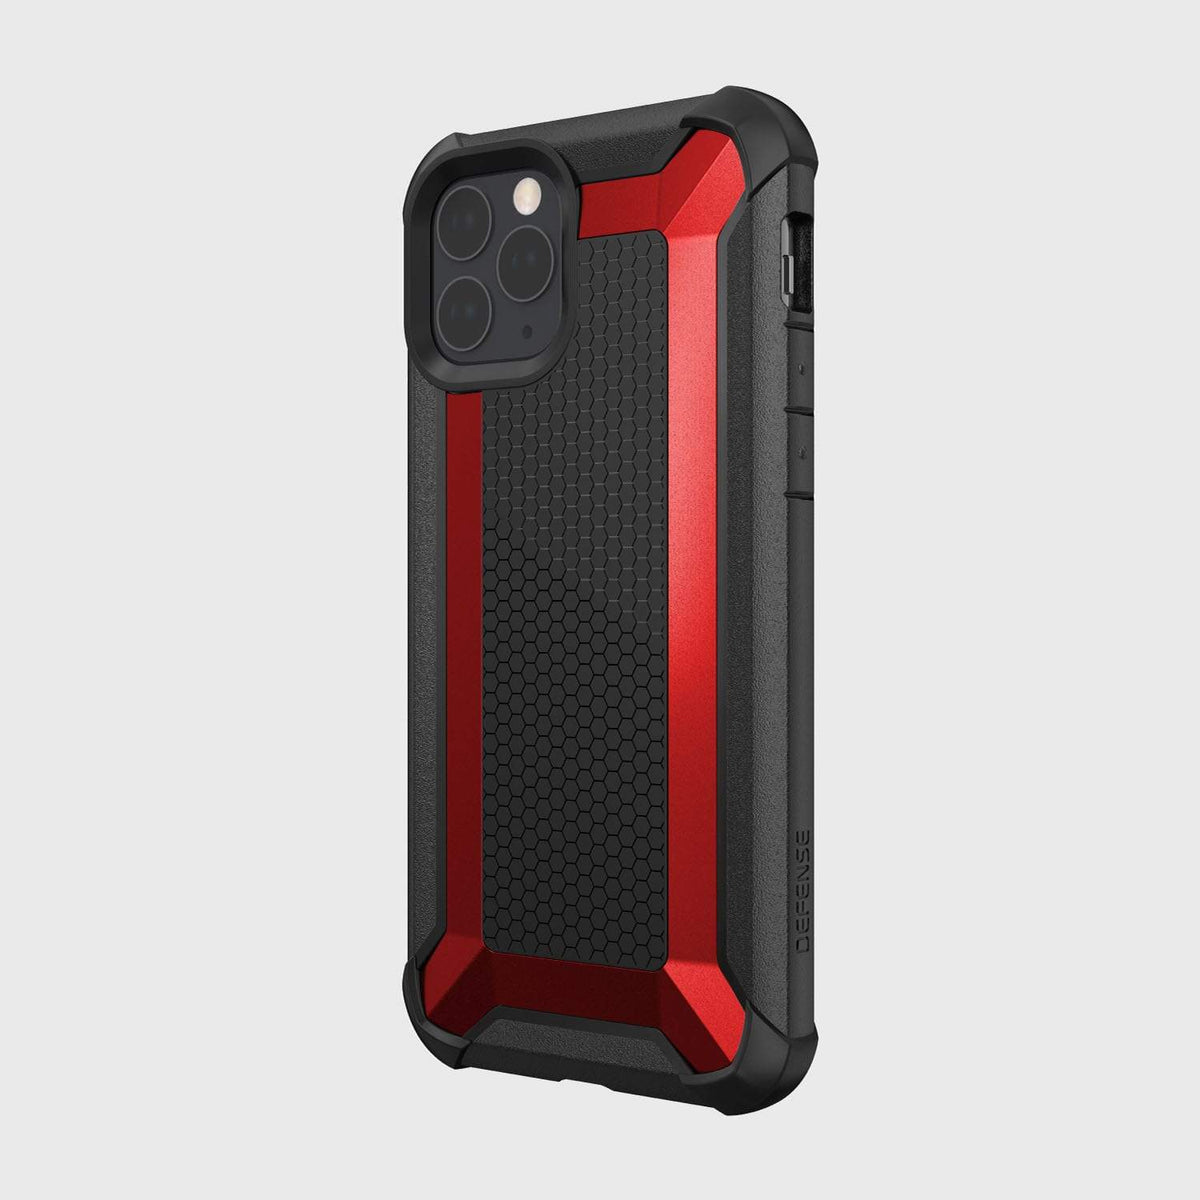 The iPhone 11 Pro Max Case - TACTICAL by Raptic is a black and red edition designed with a shock-absorbing rubber exterior. This case meets the Military Standard MIL-STD-810G for protection.